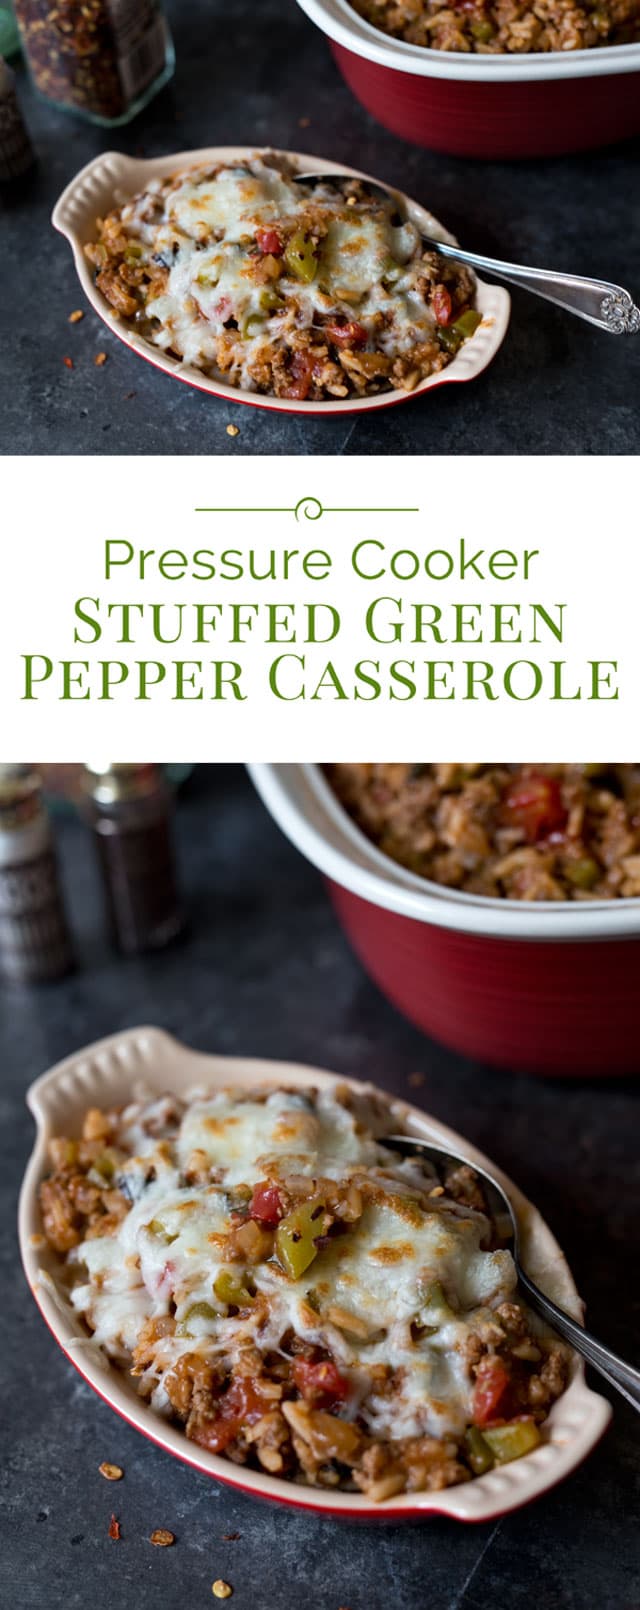 This Pressure Cooker Stuffed Green Pepper Casserole has all the flavors of stuffed green peppers but in an easy-to-make casserole. If you love stuffed green peppers, you\'re going to love this casserole. 